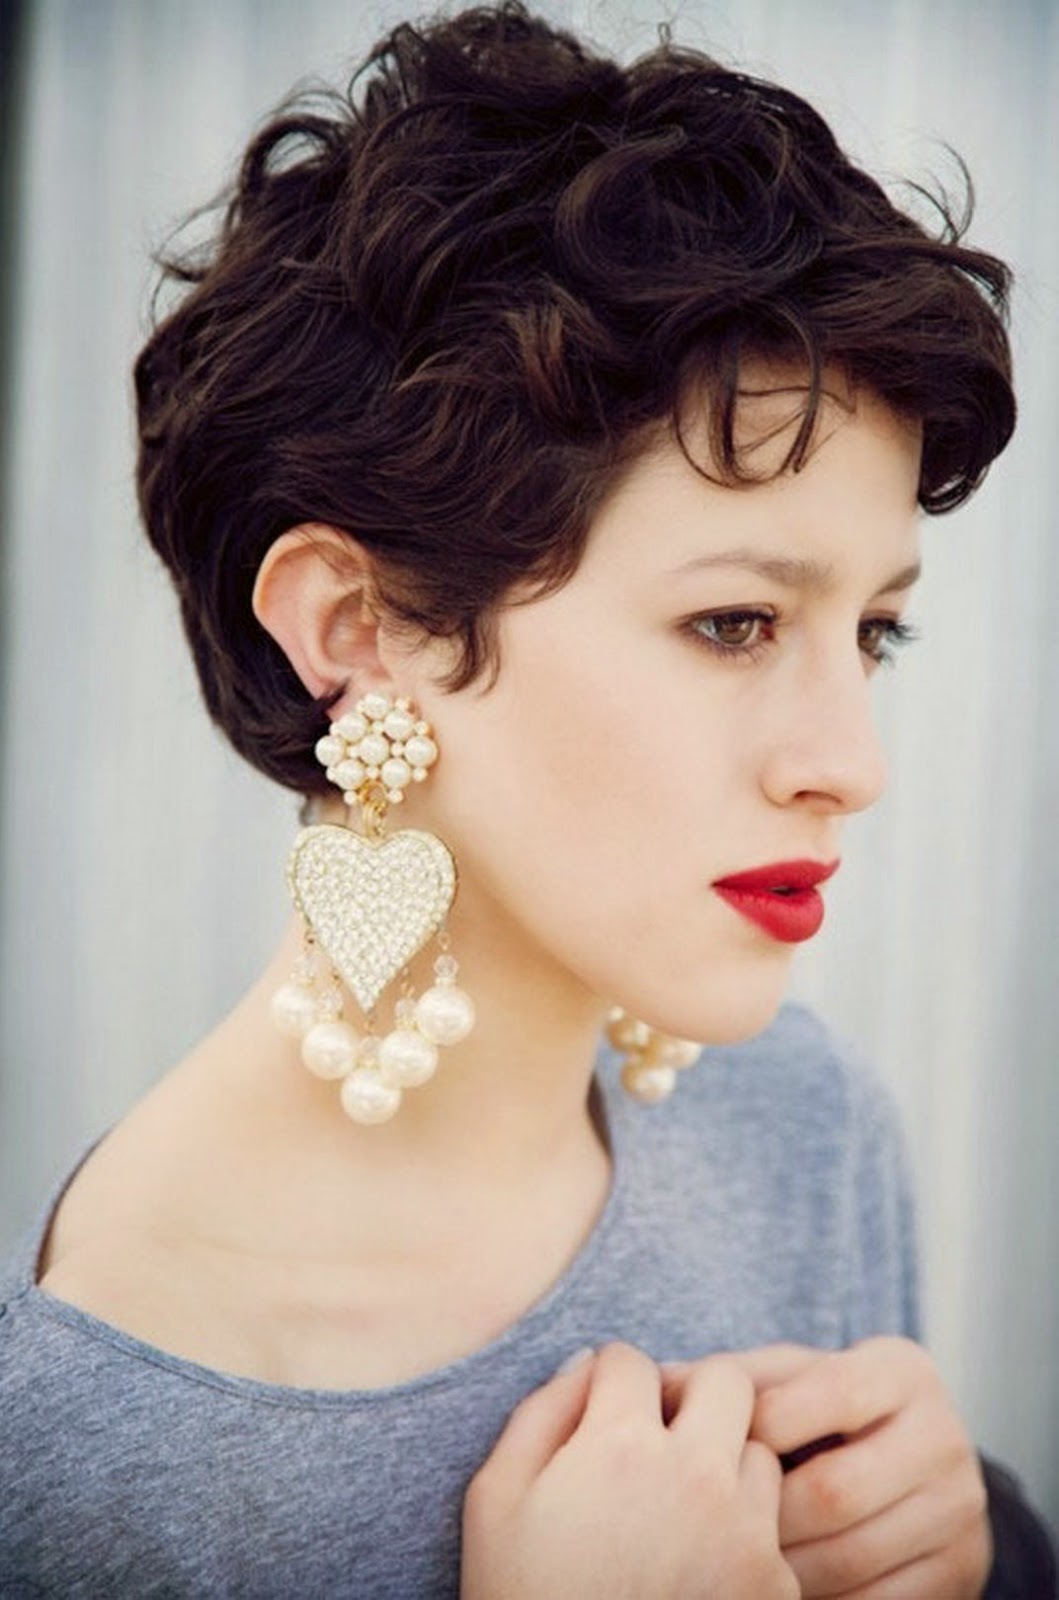 2015 Short Curly Hair Styles For Round Faces